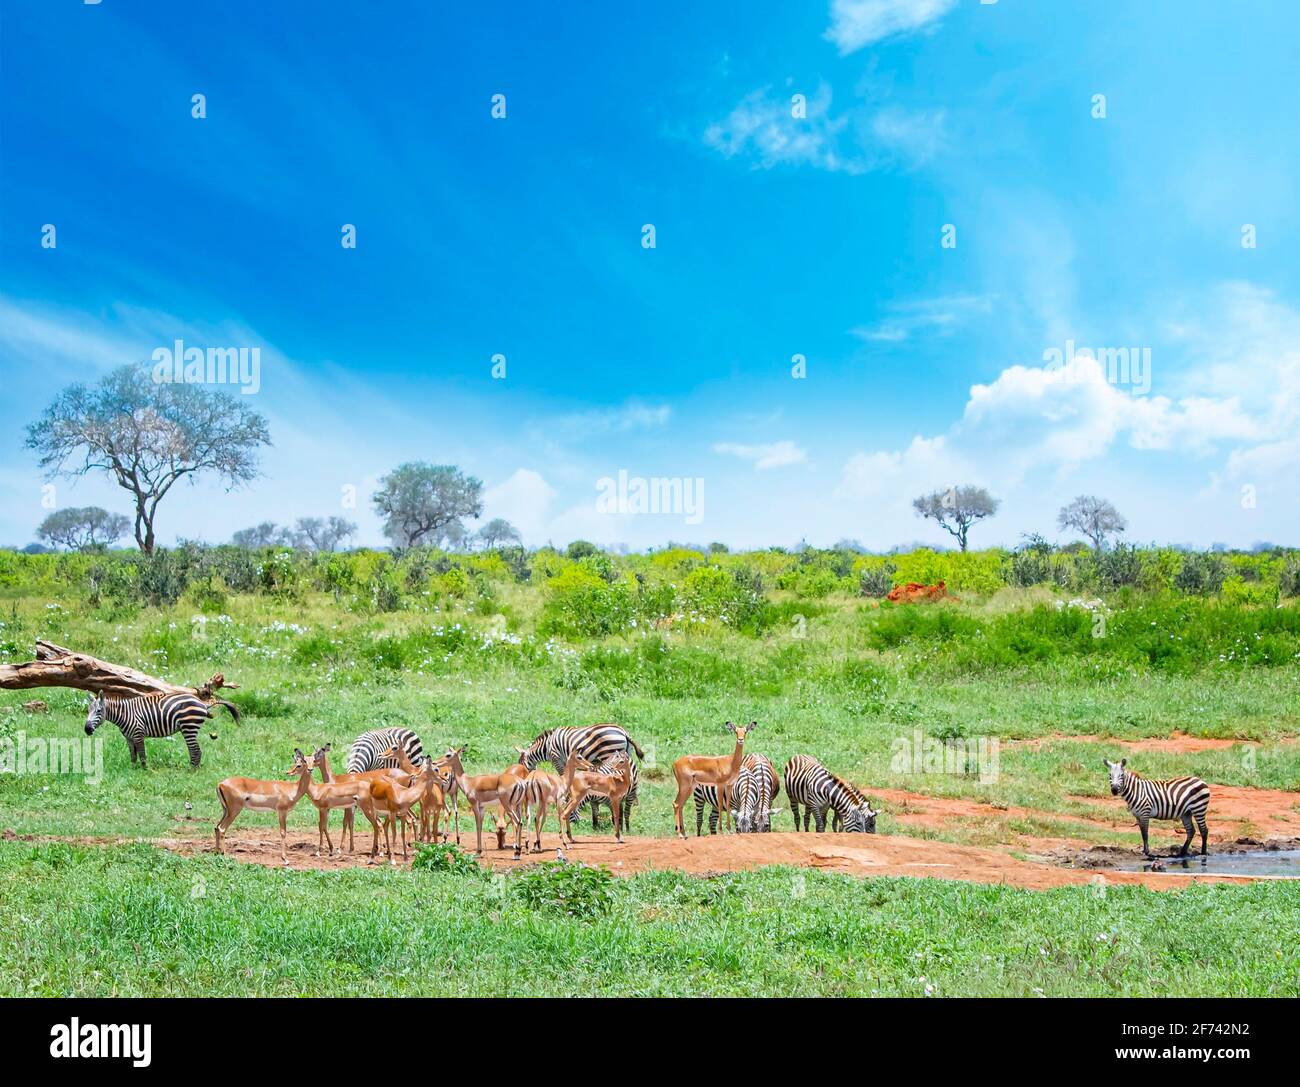 Zebras and antelopes near a watering hole on a safari in Africa. It's in Tsavo East, Kenya. The sky is beautiful blue. Stock Photo